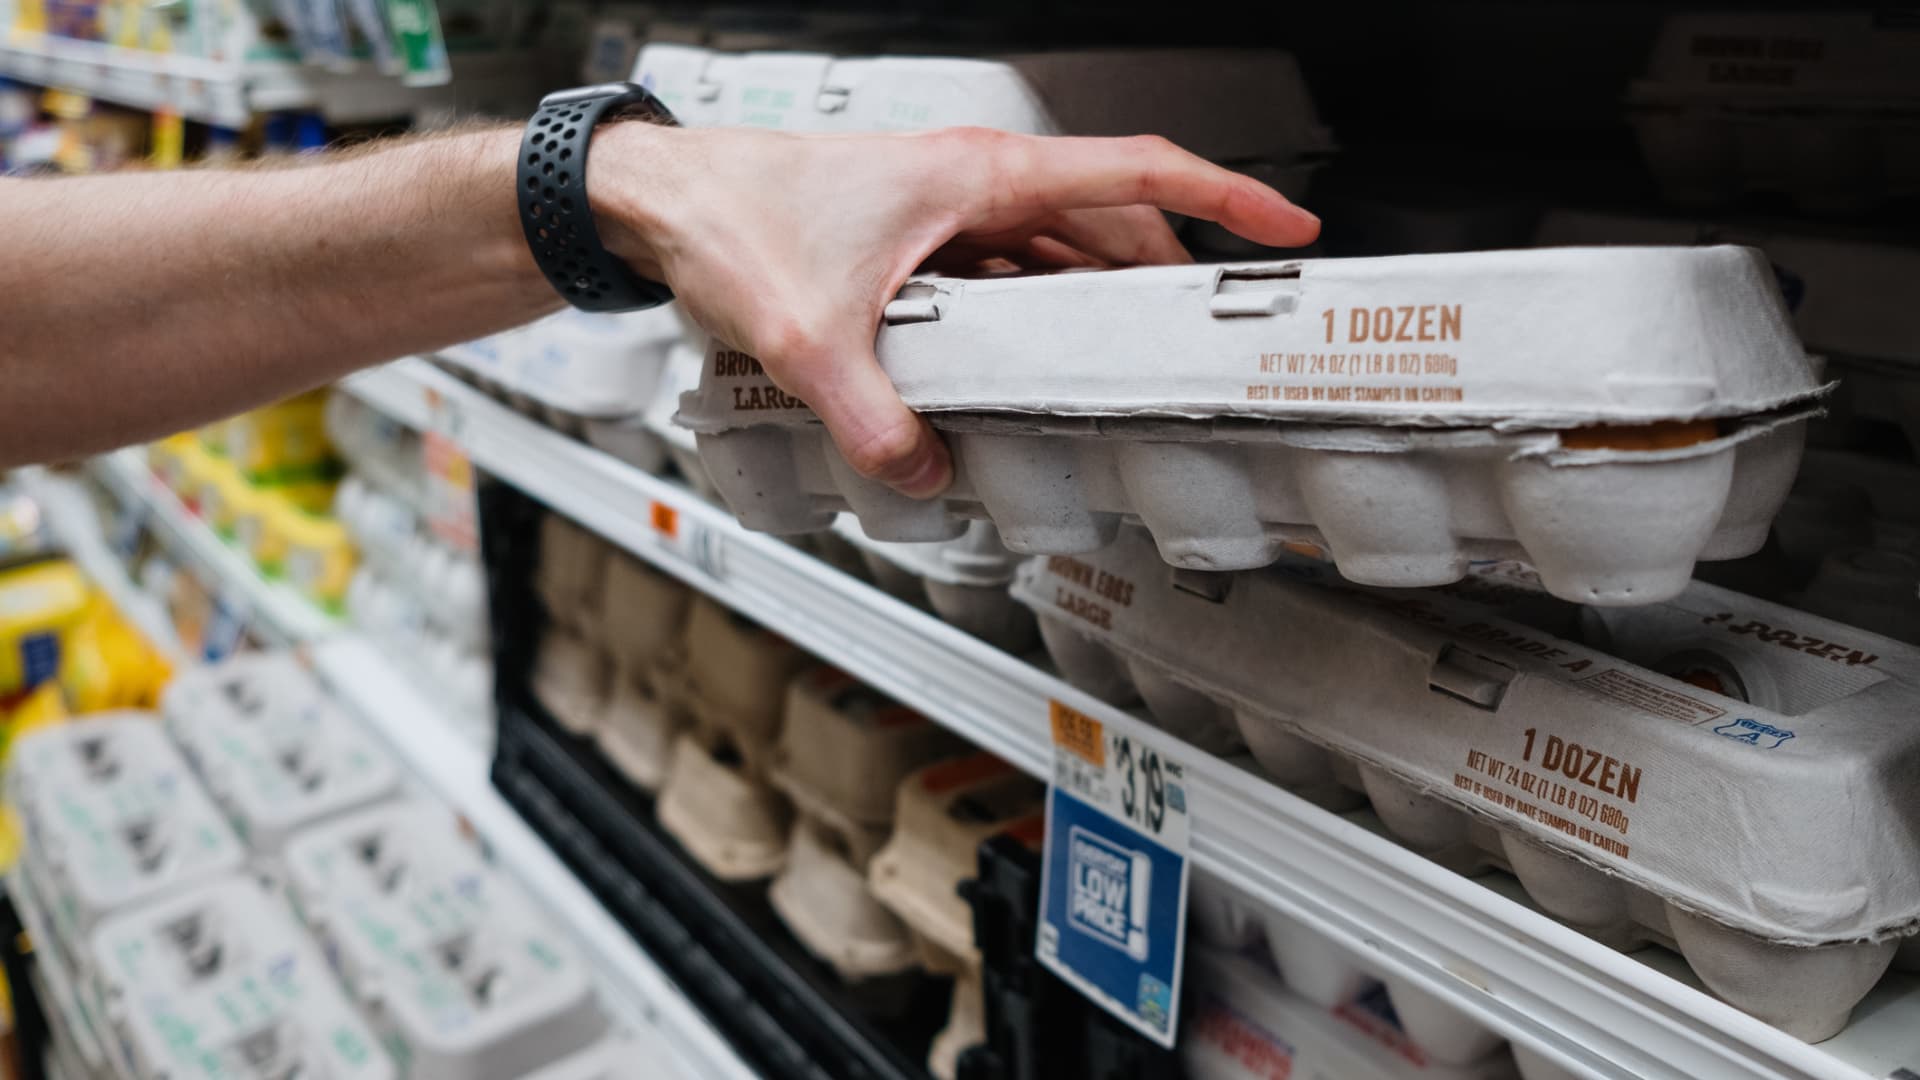 Eggs are a $10 billion ‘low-margin industry,’ says analyst. Here’s who profits